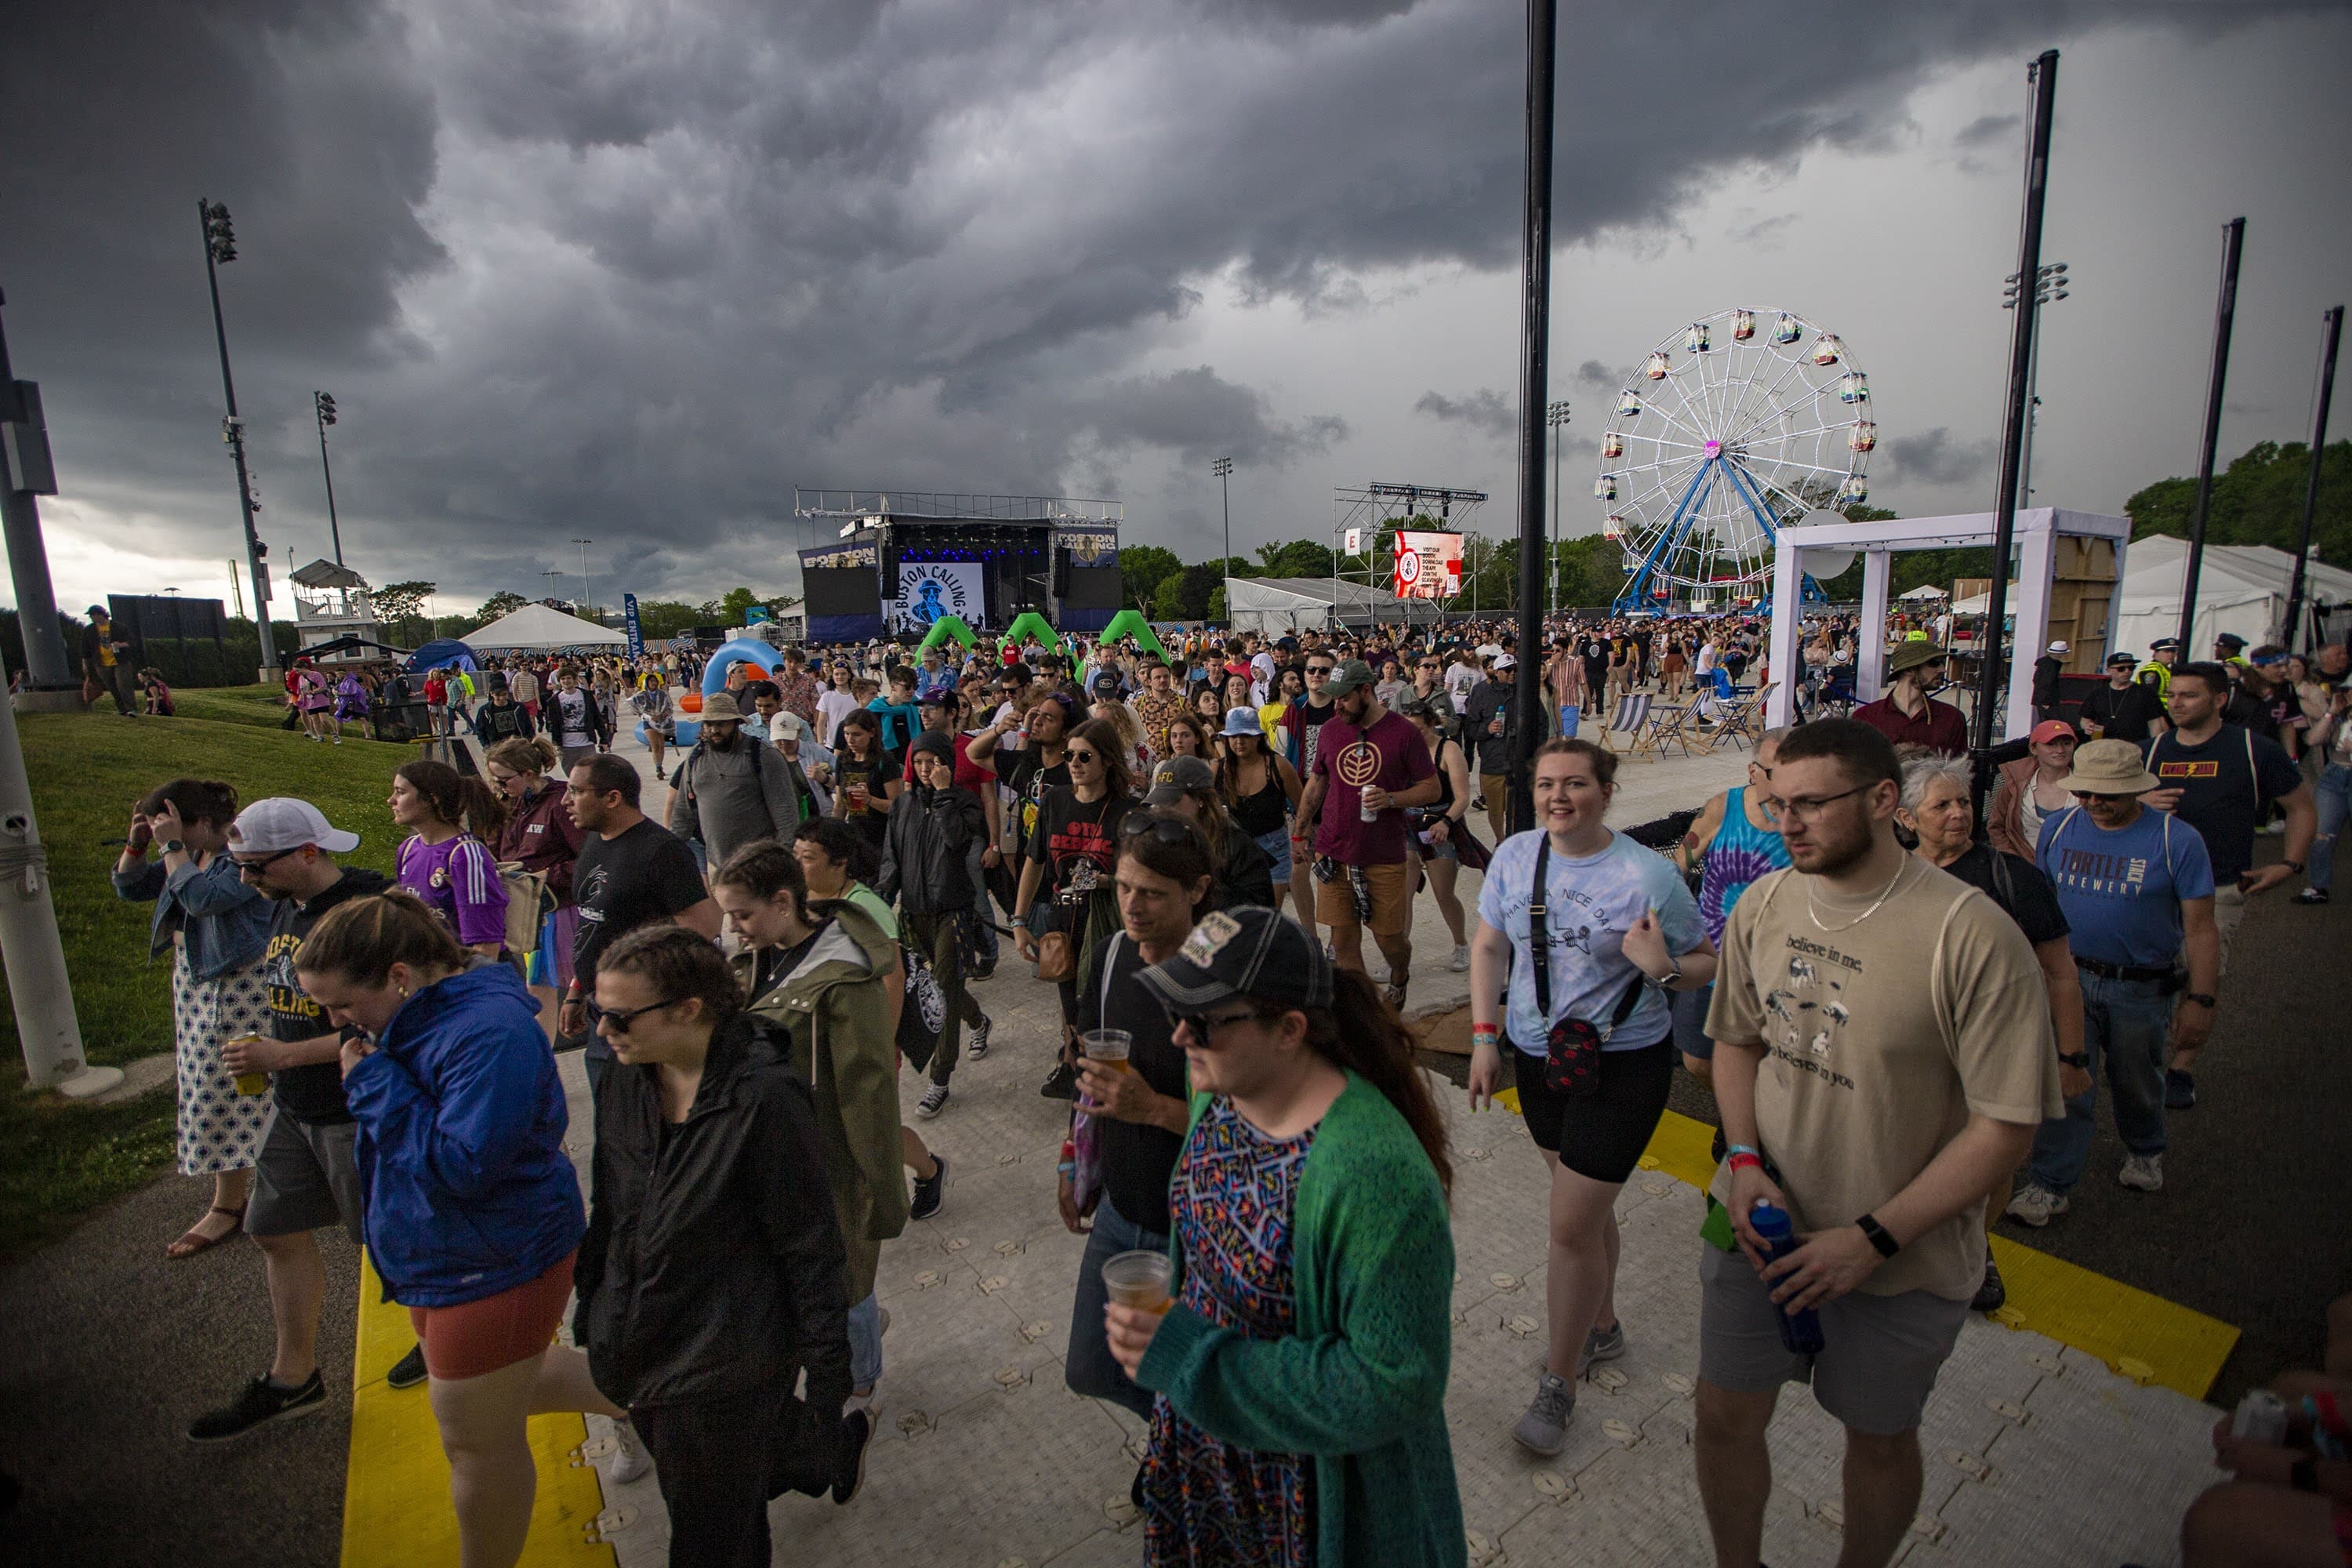 Festival-goers at Boston Calling are evacuated due to severe weather Saturday afternoon. (Jesse Costa/WBUR)